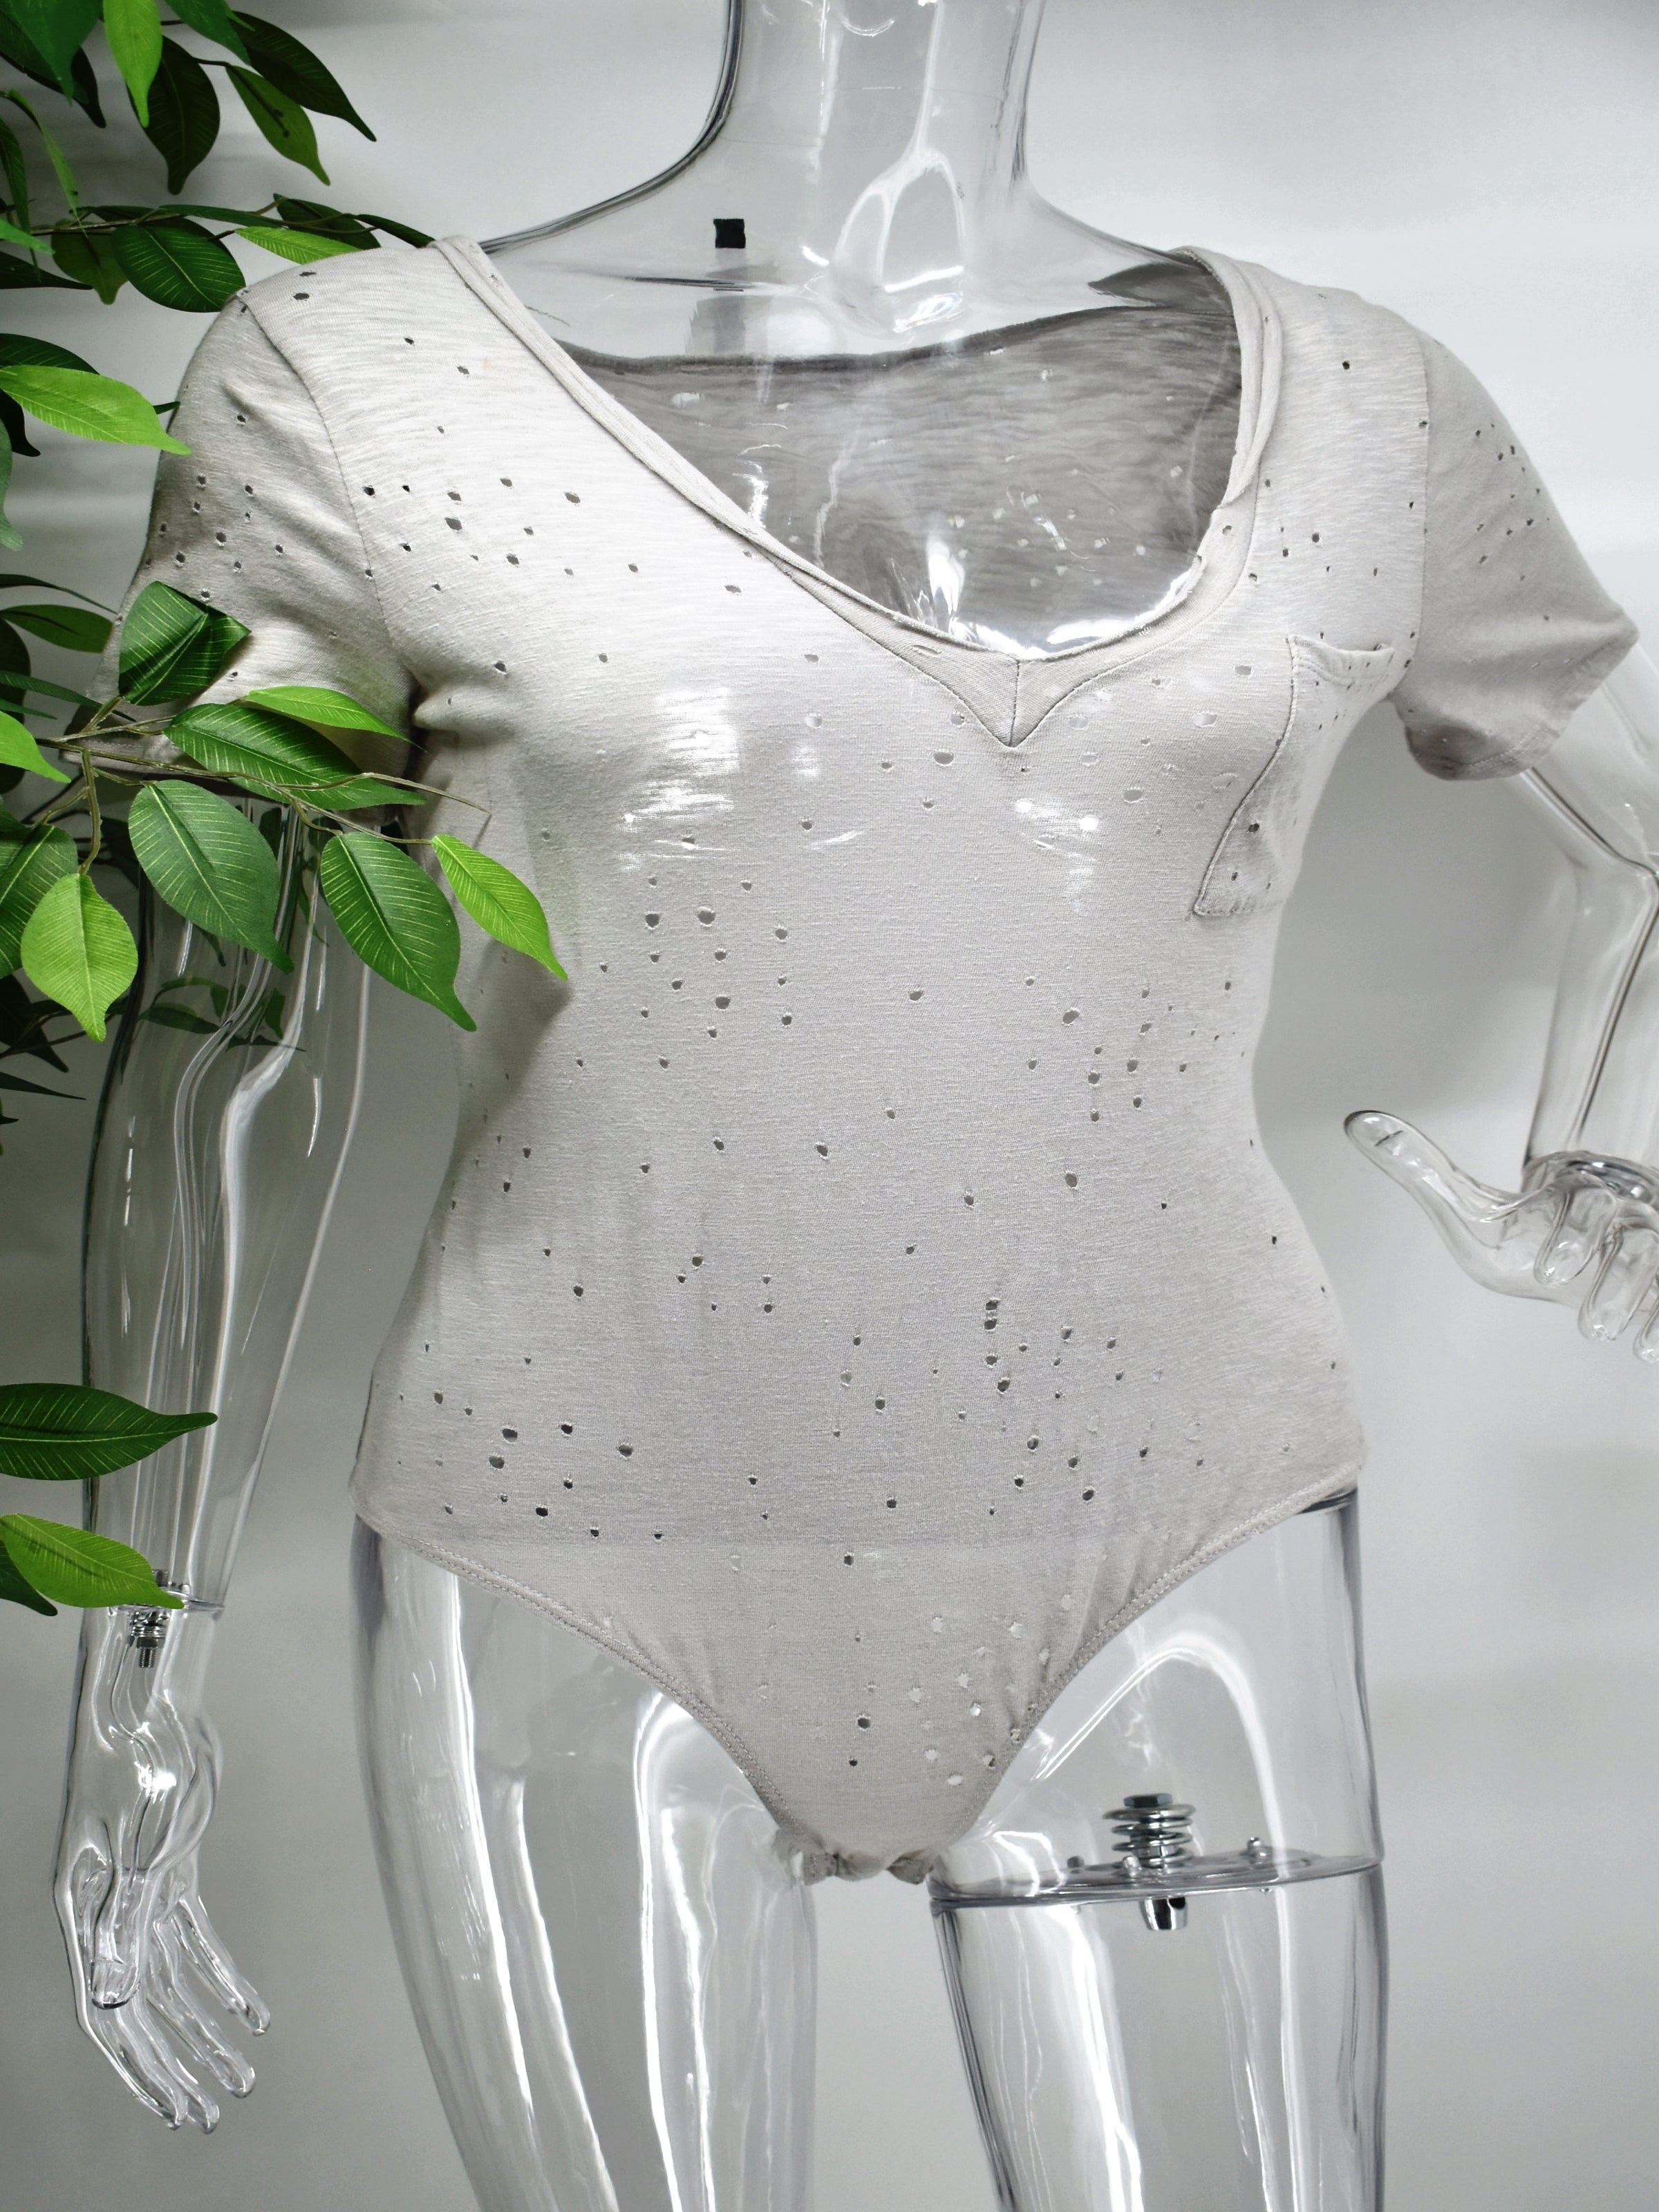 Dressed up or worn casual our Beata cotton body suit is multifaceted. Our Beata is a cotton t-shirt  with a fashionable twist . This V neck shirt has a bodysuit design with edgy punched holes through out the bodysuit.